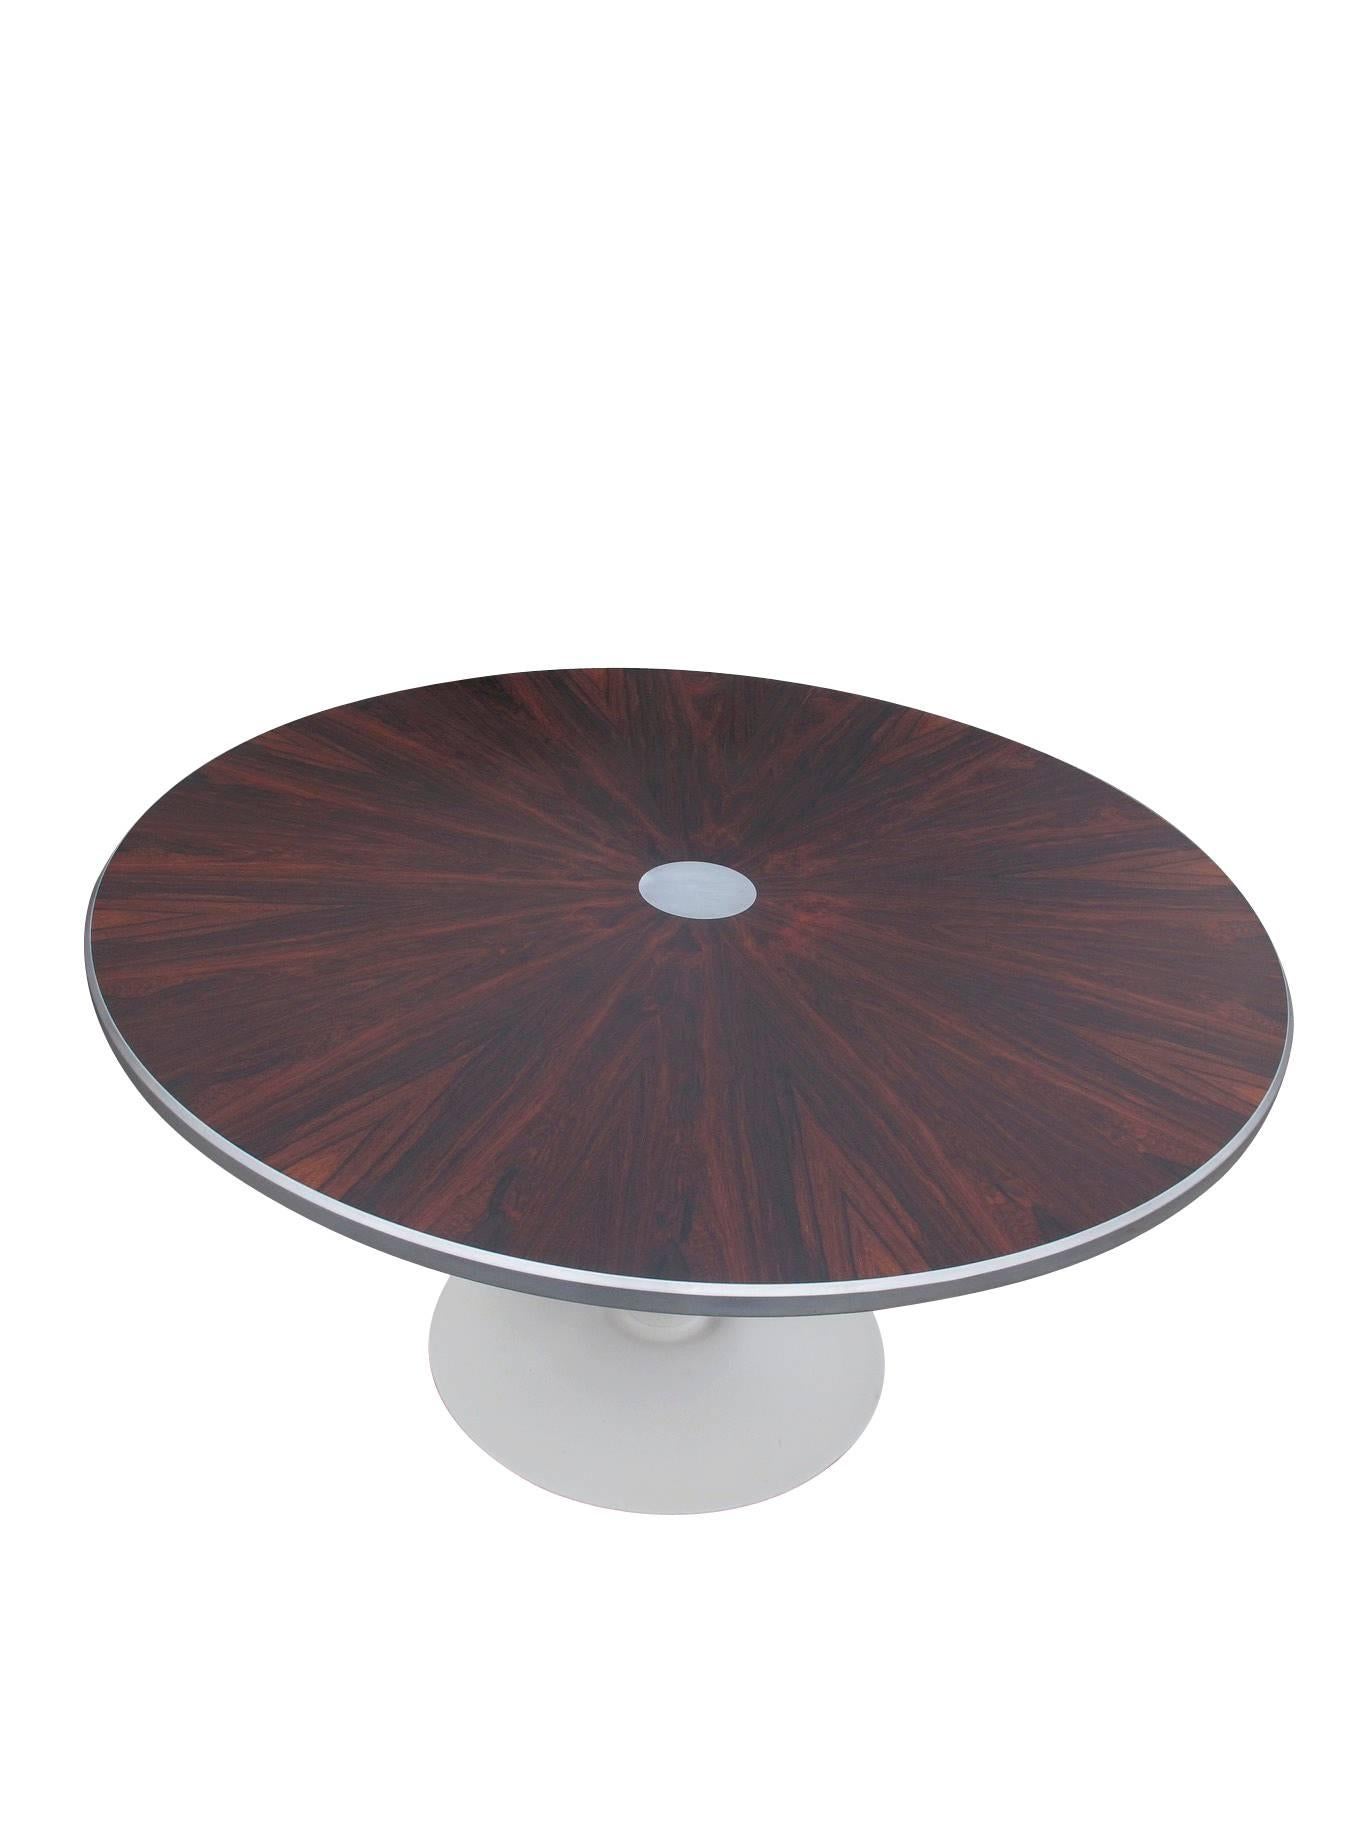 Danish dining table designed by Steen Ostergaard for Poul Cadovius. Stunning Brazilian rosewood arranged in a book-matched star pattern around an aluminum disc in center; silver aluminum trim on outer edge, raised on the original powder-coated